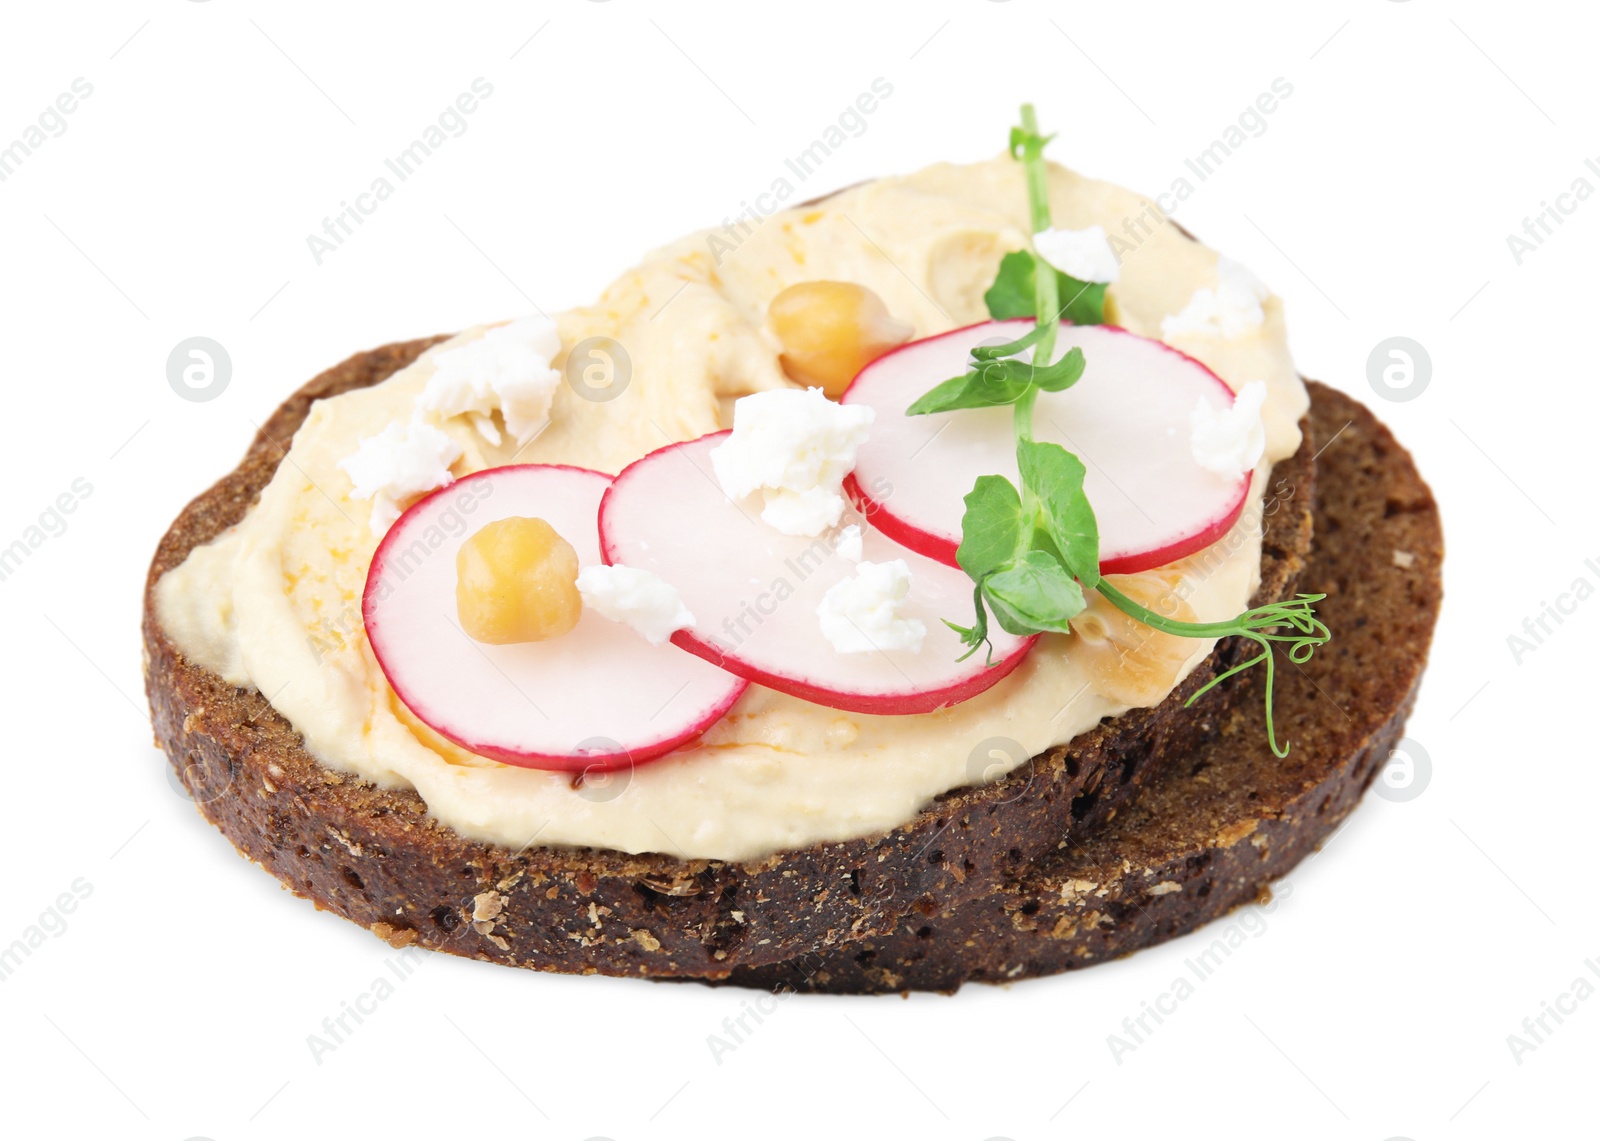 Photo of Delicious sandwich with hummus and ingredients on white background